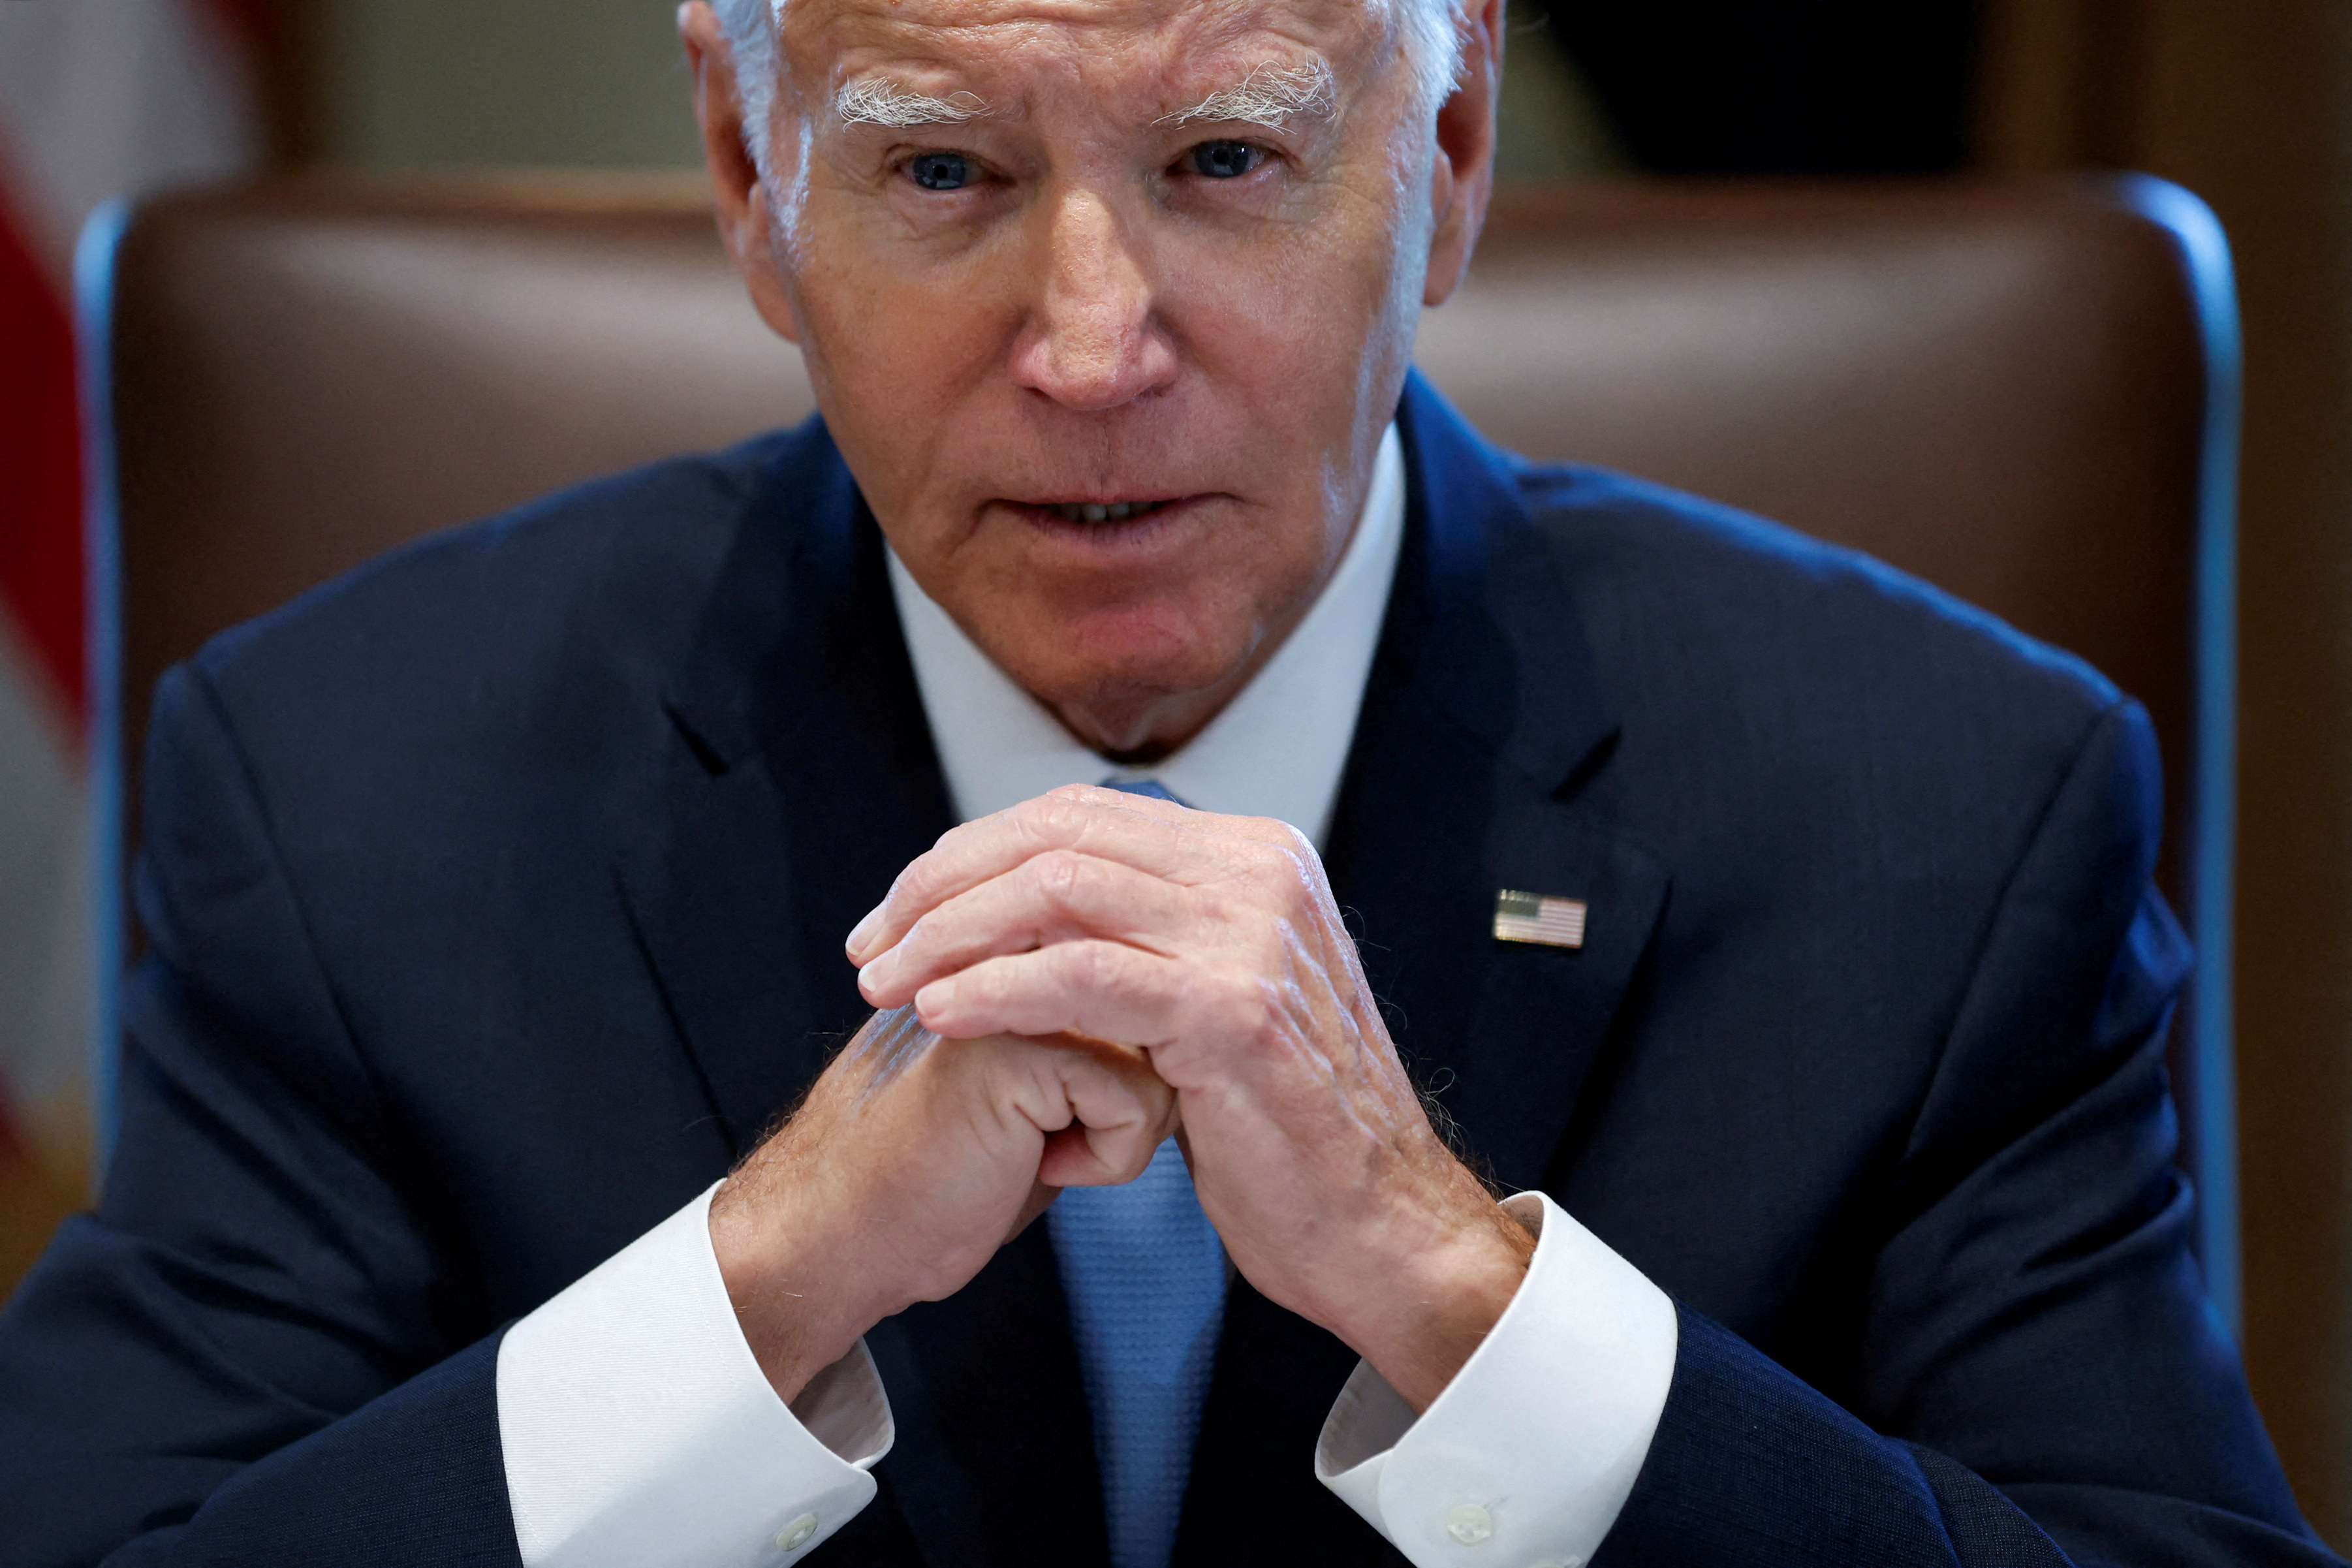 U.S. President Biden convenes a meeting of his Cancer Cabinet at the White House in Washington